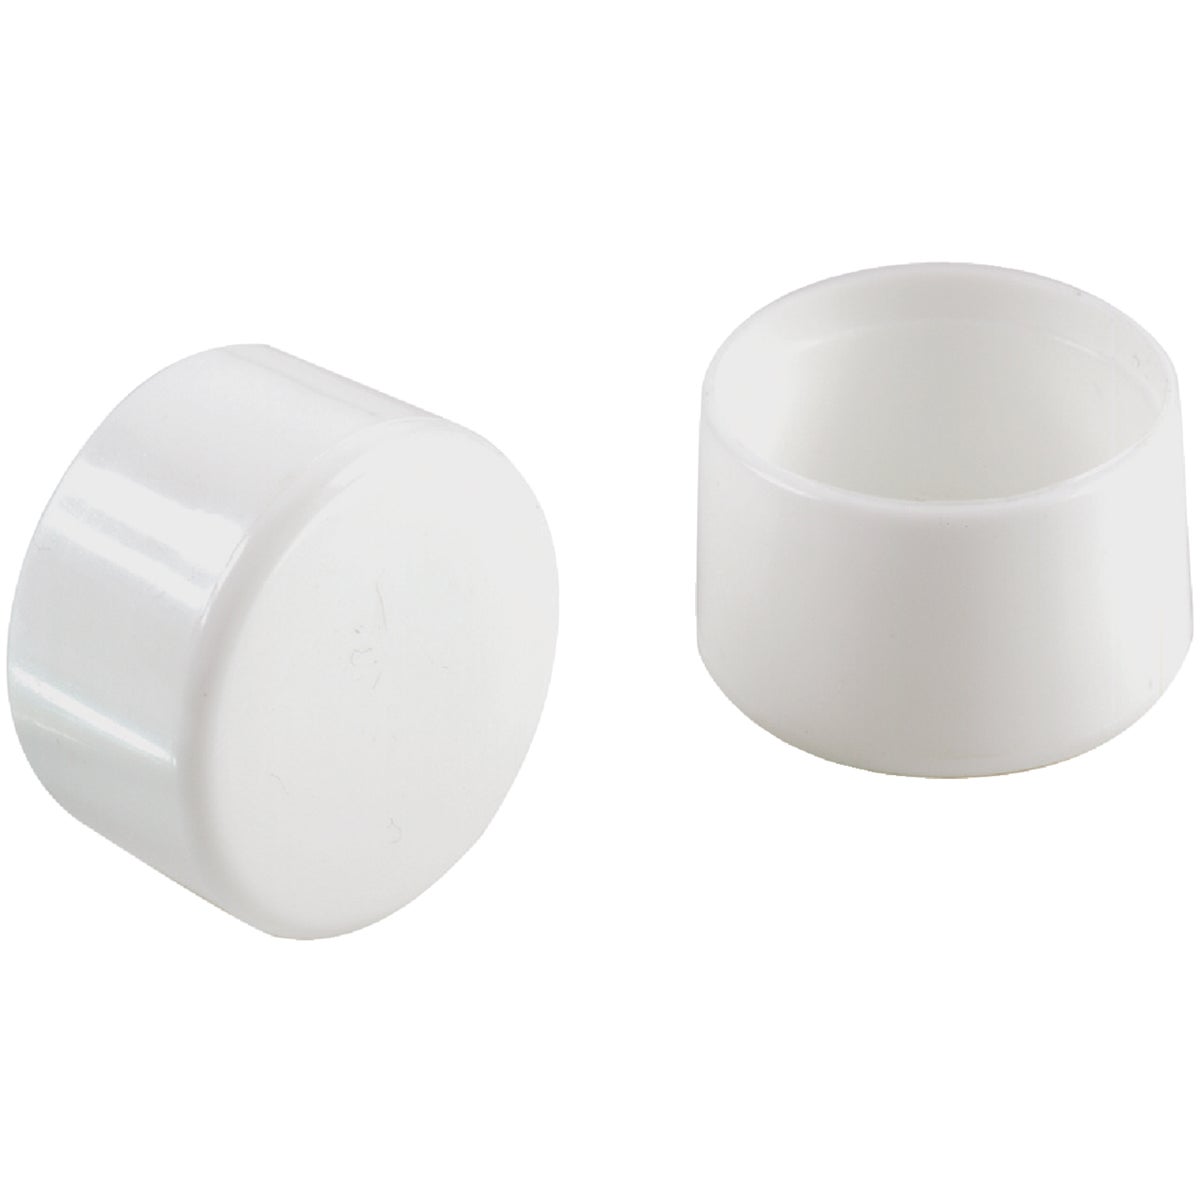 Item 227749, Plastic low-rise tips are great for creating a safe and finished look at 